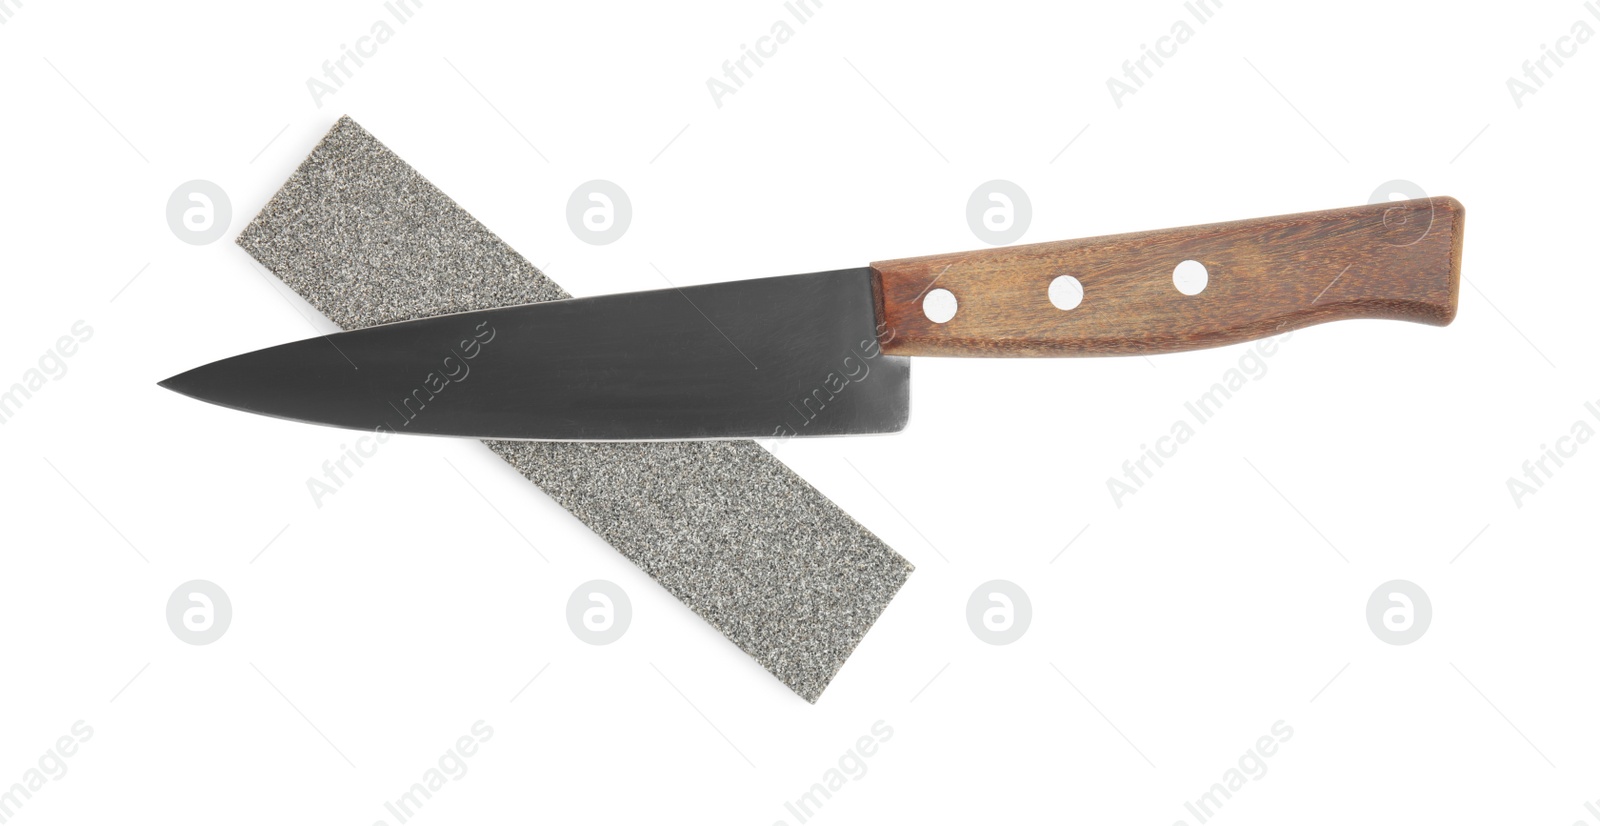 Photo of Sharpening stone and knife on white background, top view